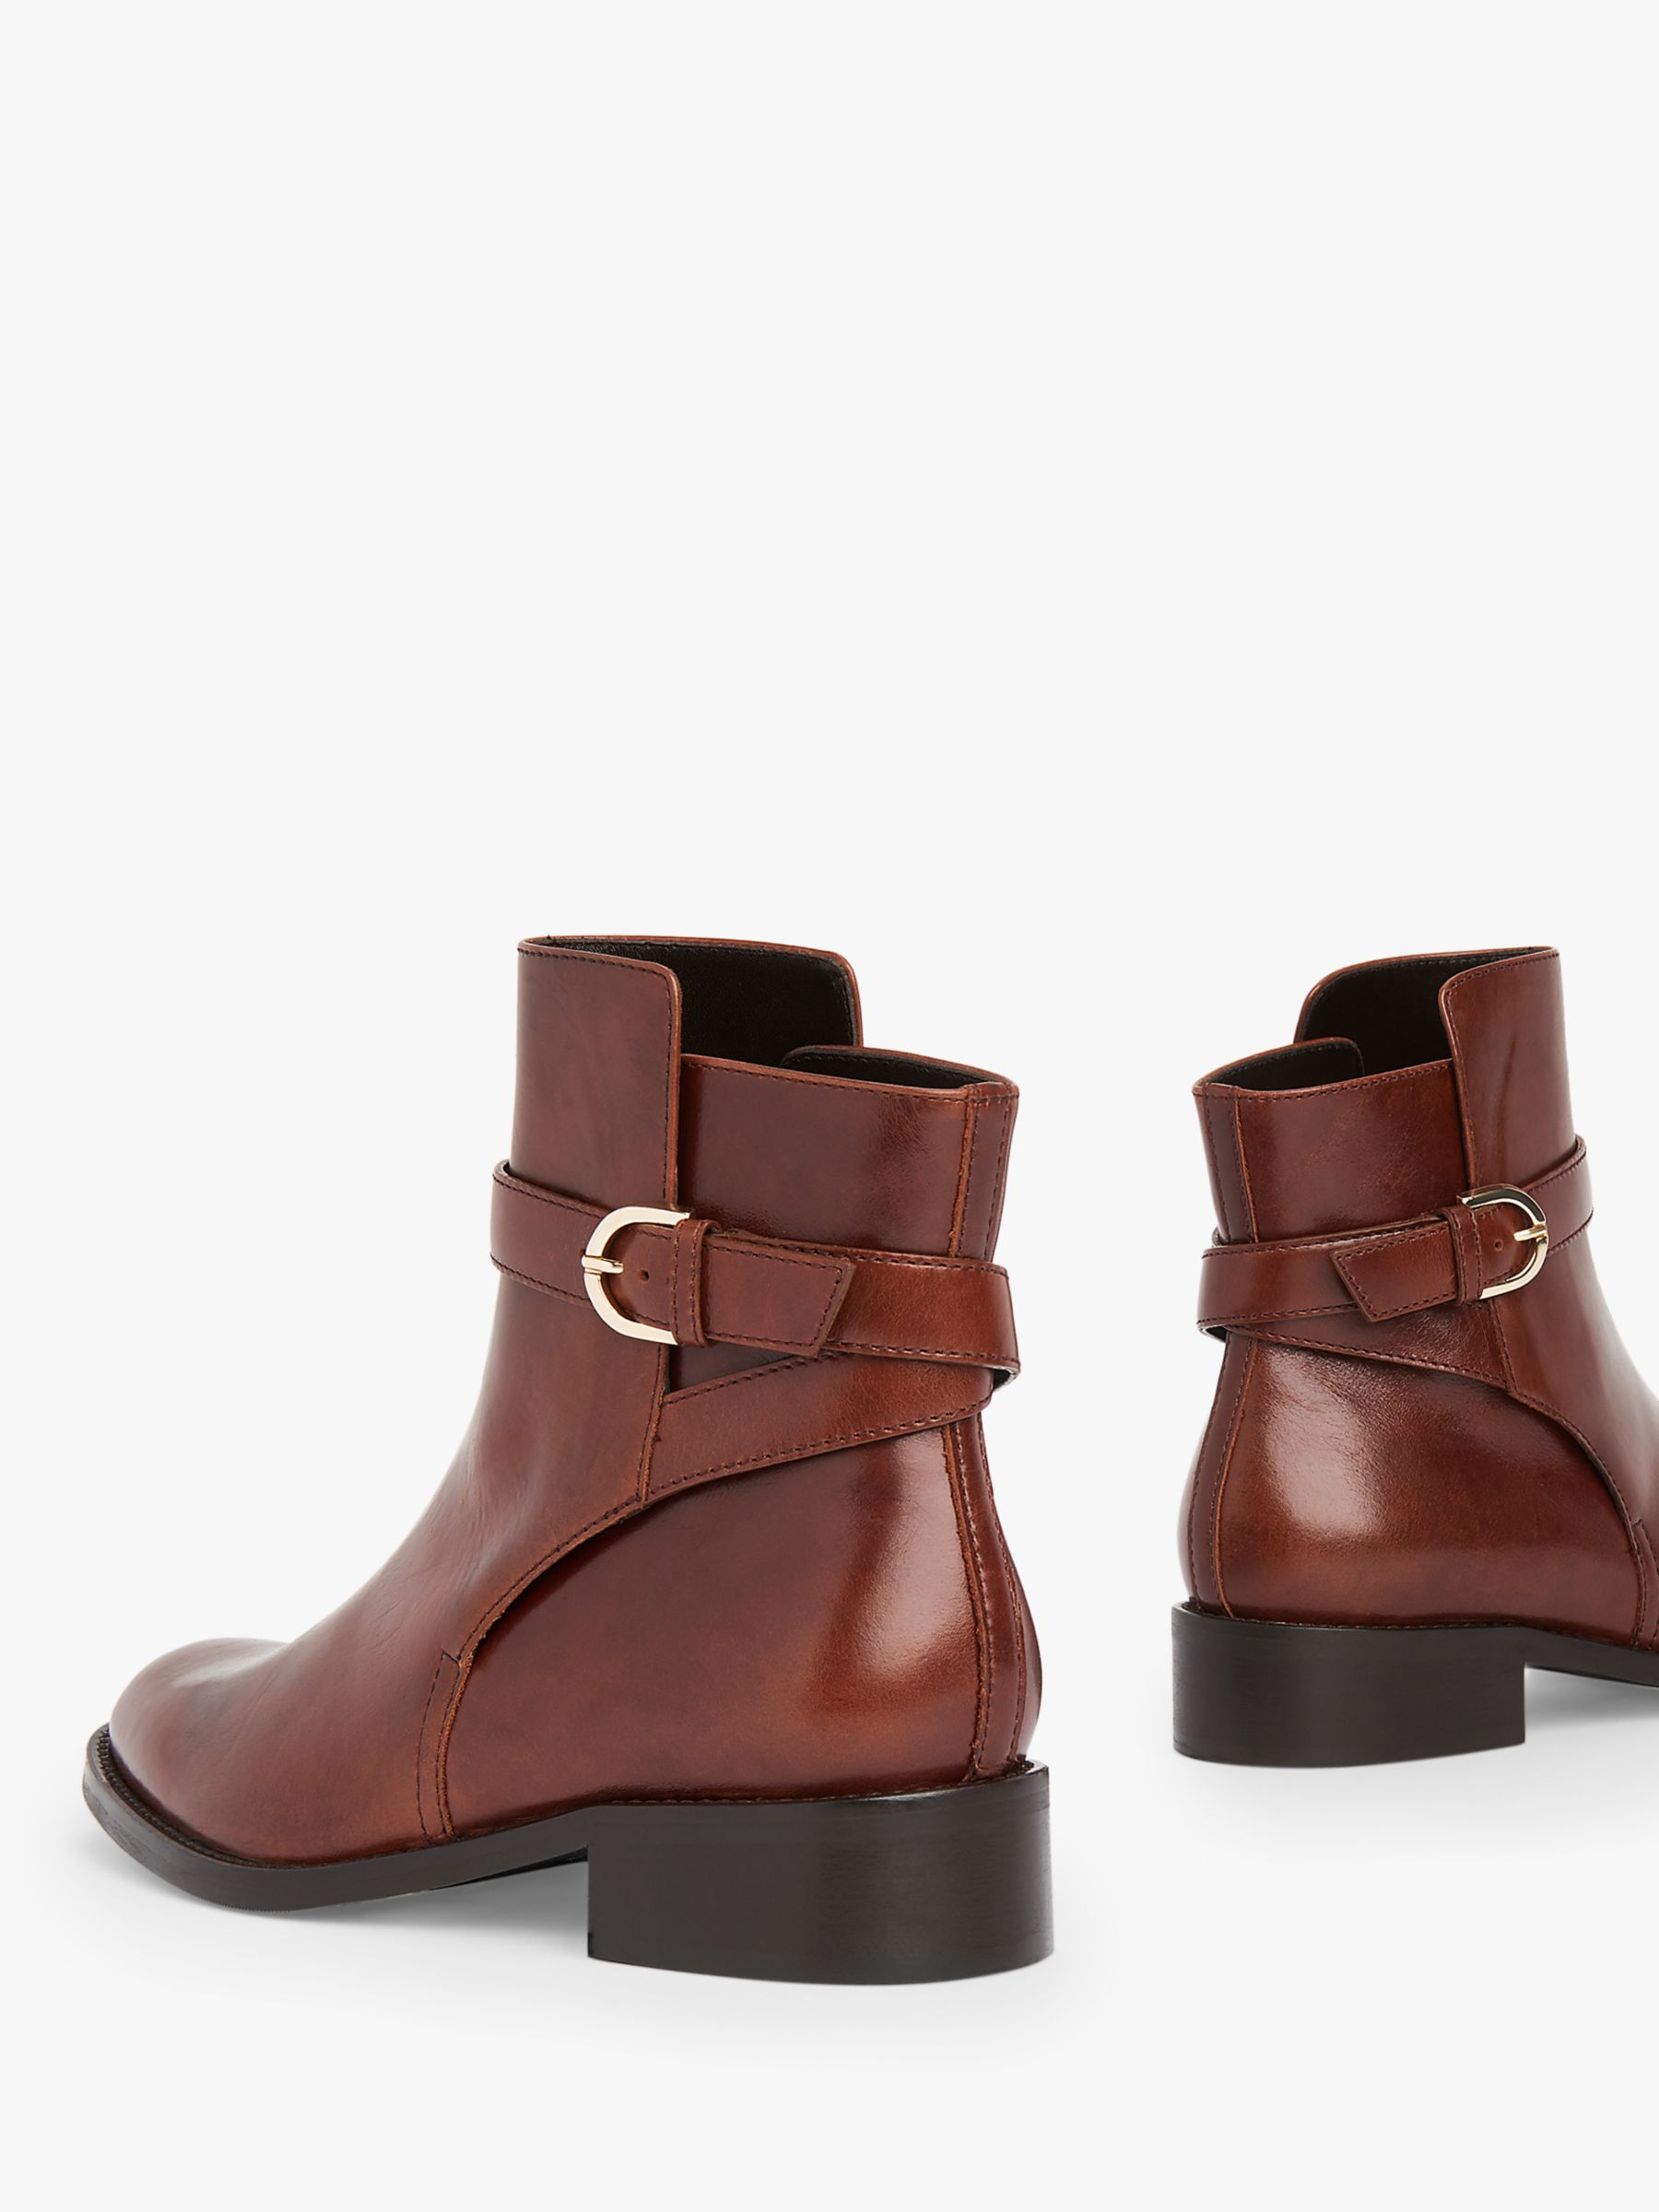 L.K.Bennett Annie Leather Flat Ankle Boots, Brown at John Lewis & Partners